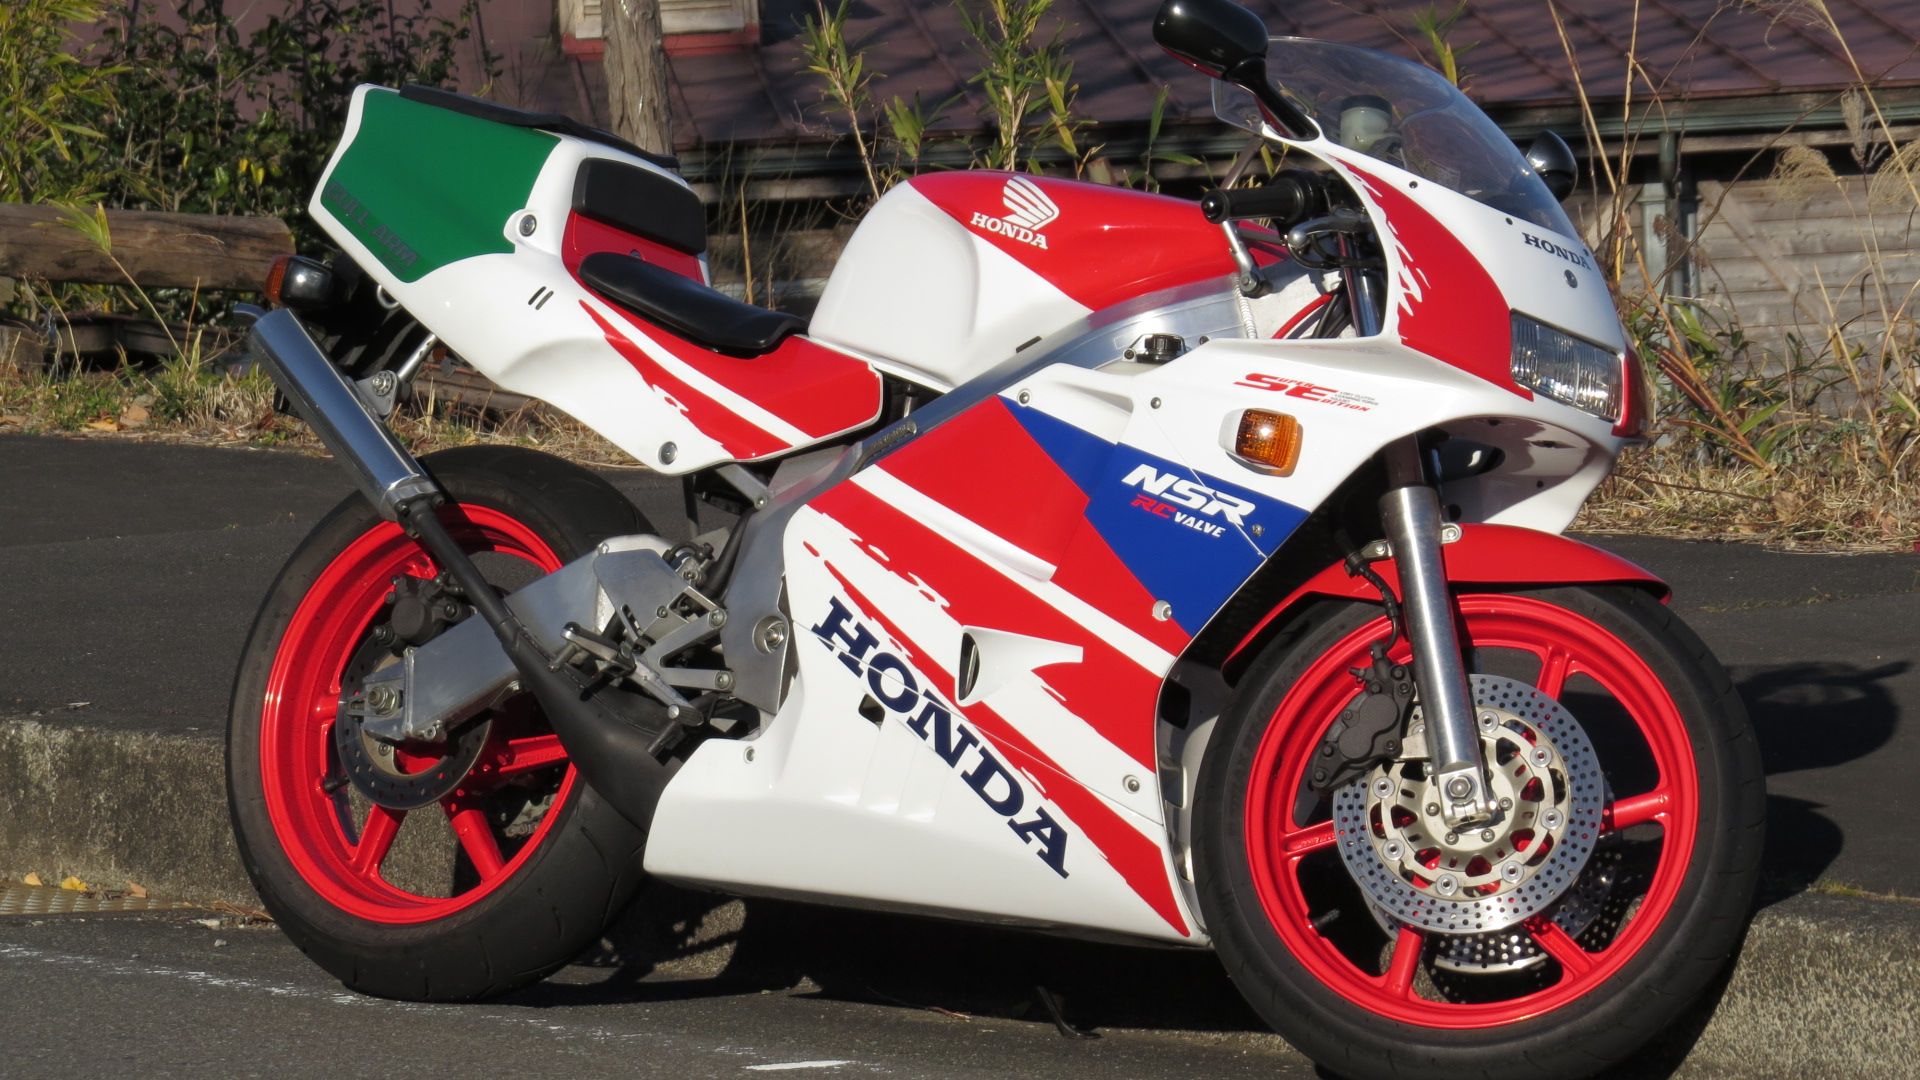 Honda NSR250 in white and red